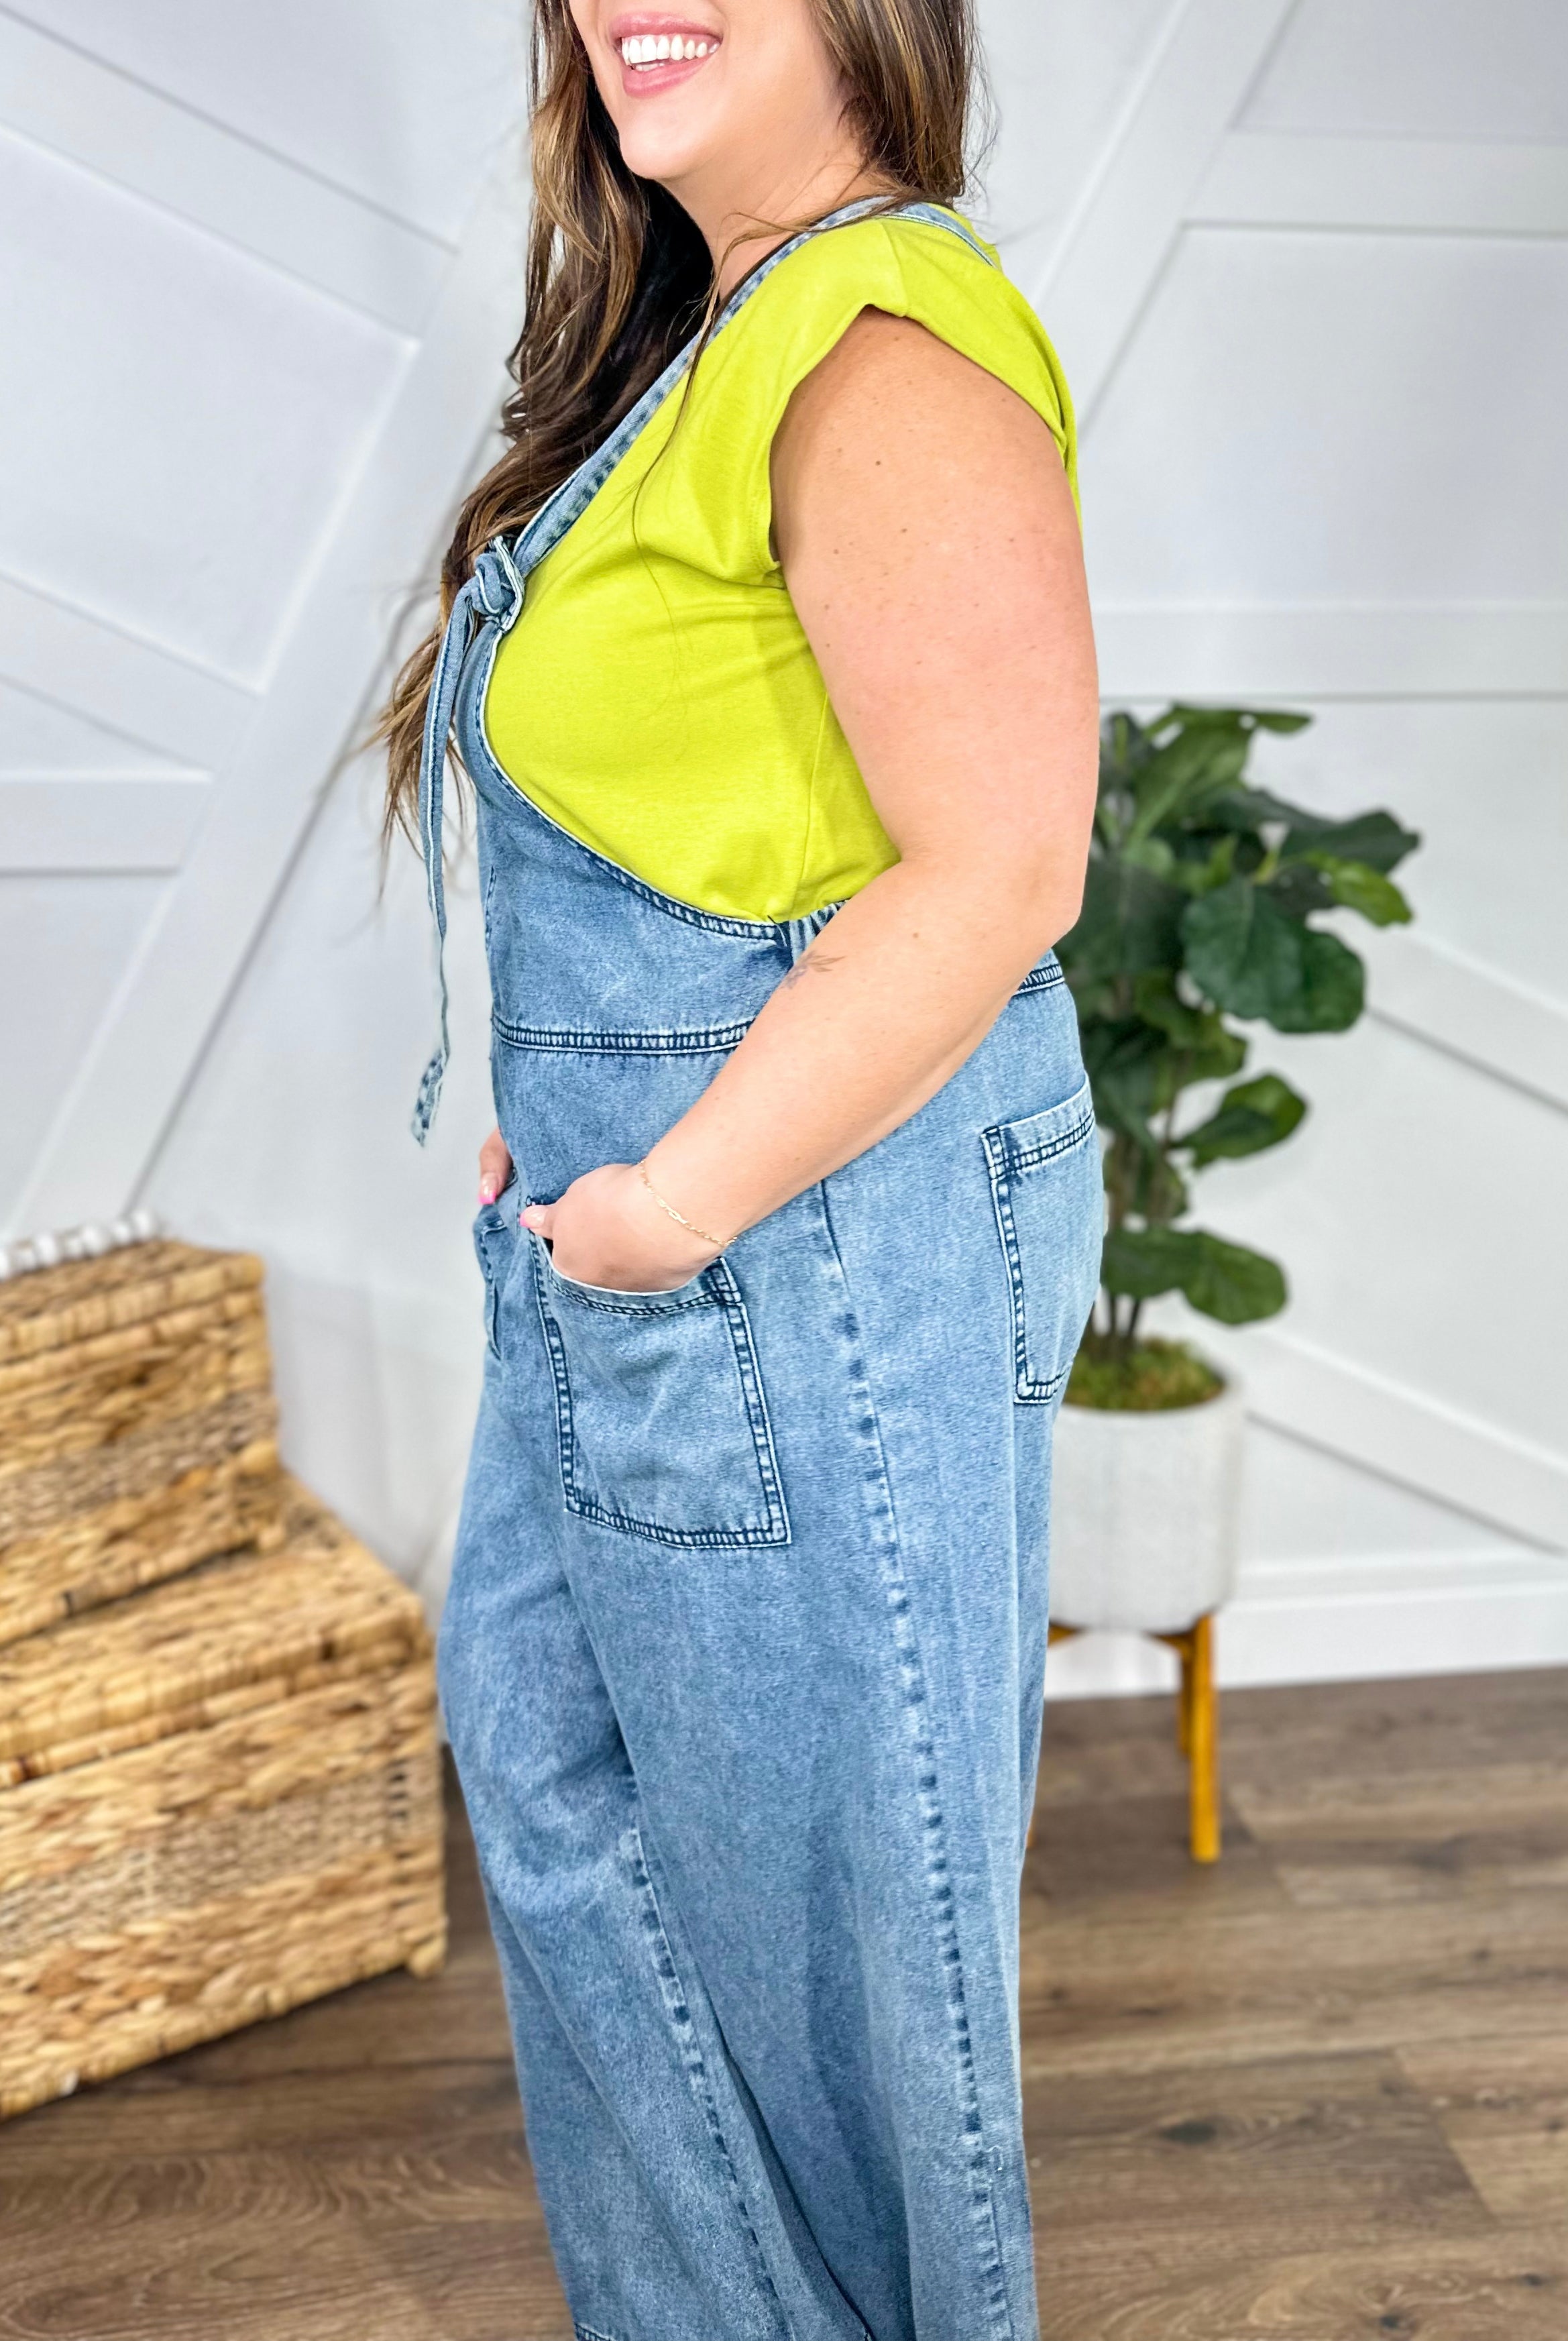 Home At Last Denim Jumpsuit-230 Dresses/Jumpsuits/Rompers-Easel-Heathered Boho Boutique, Women's Fashion and Accessories in Palmetto, FL